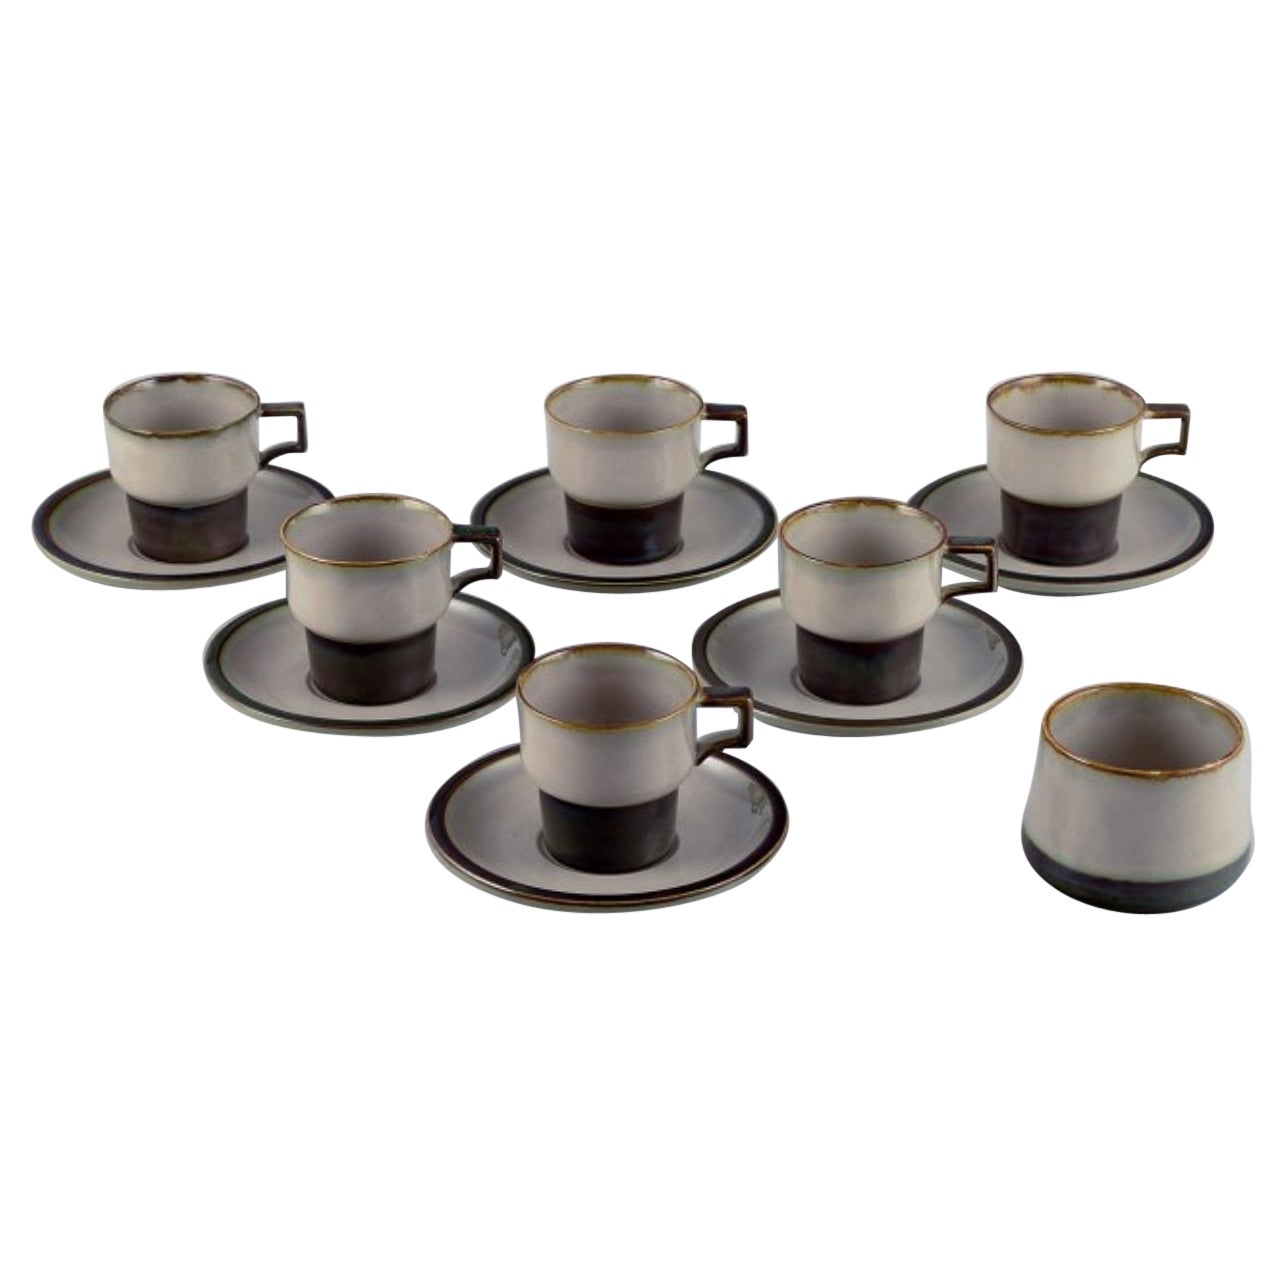 Bing & Grøndahl, "Tema", set of six coffee cups with saucers in stoneware. For Sale